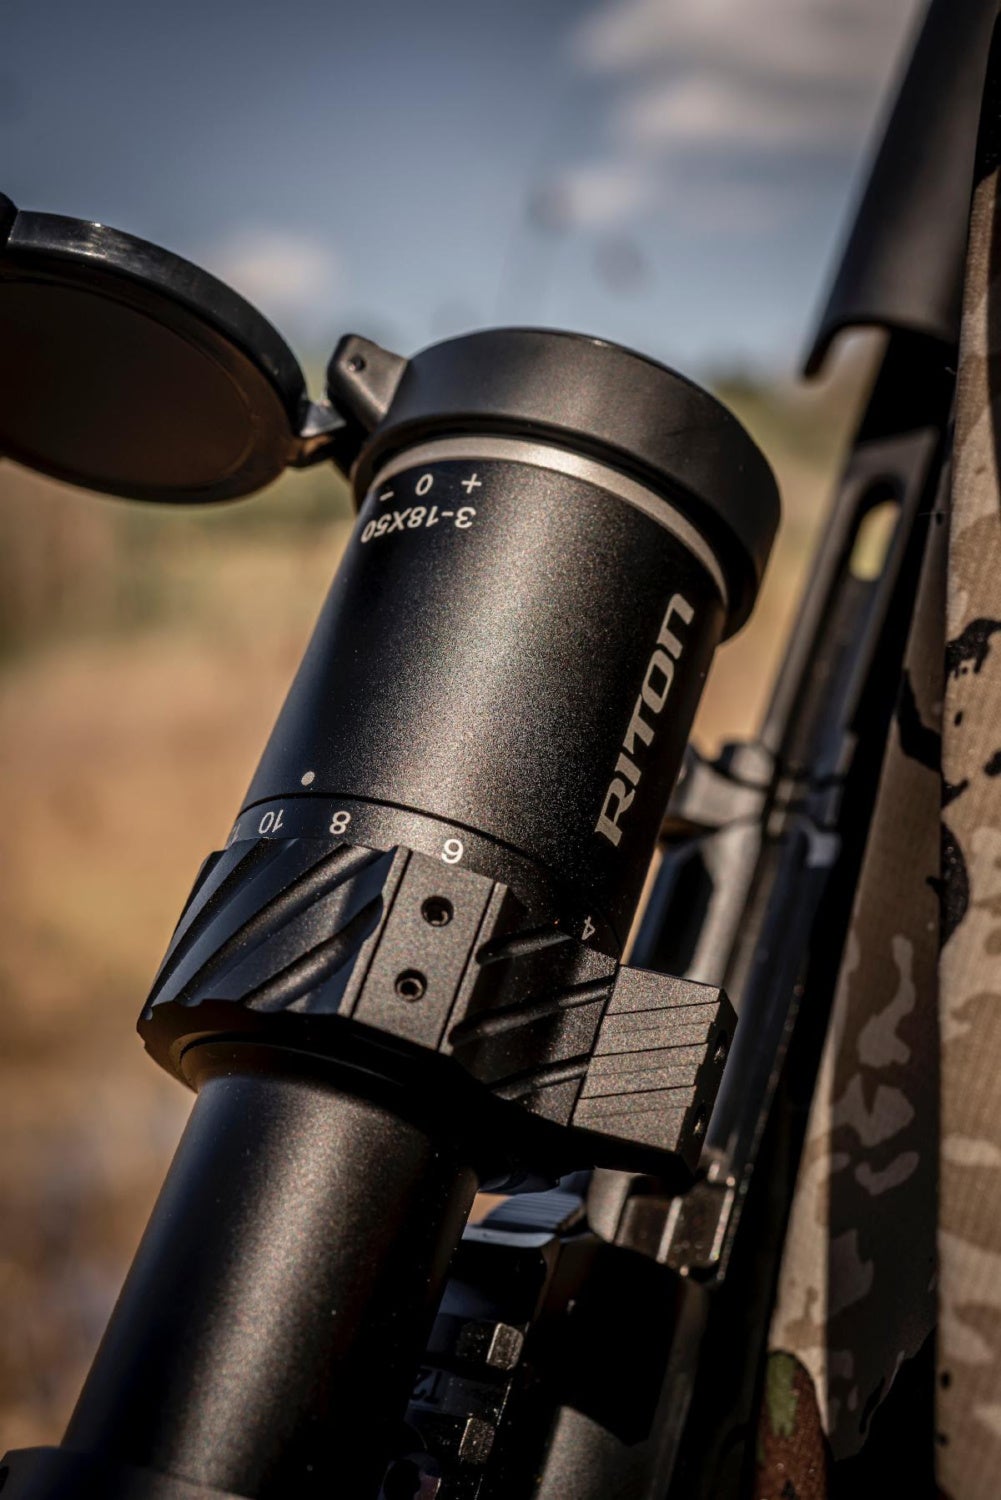 This newest Riton riflescope is available now, with a $659.99 MSRP.